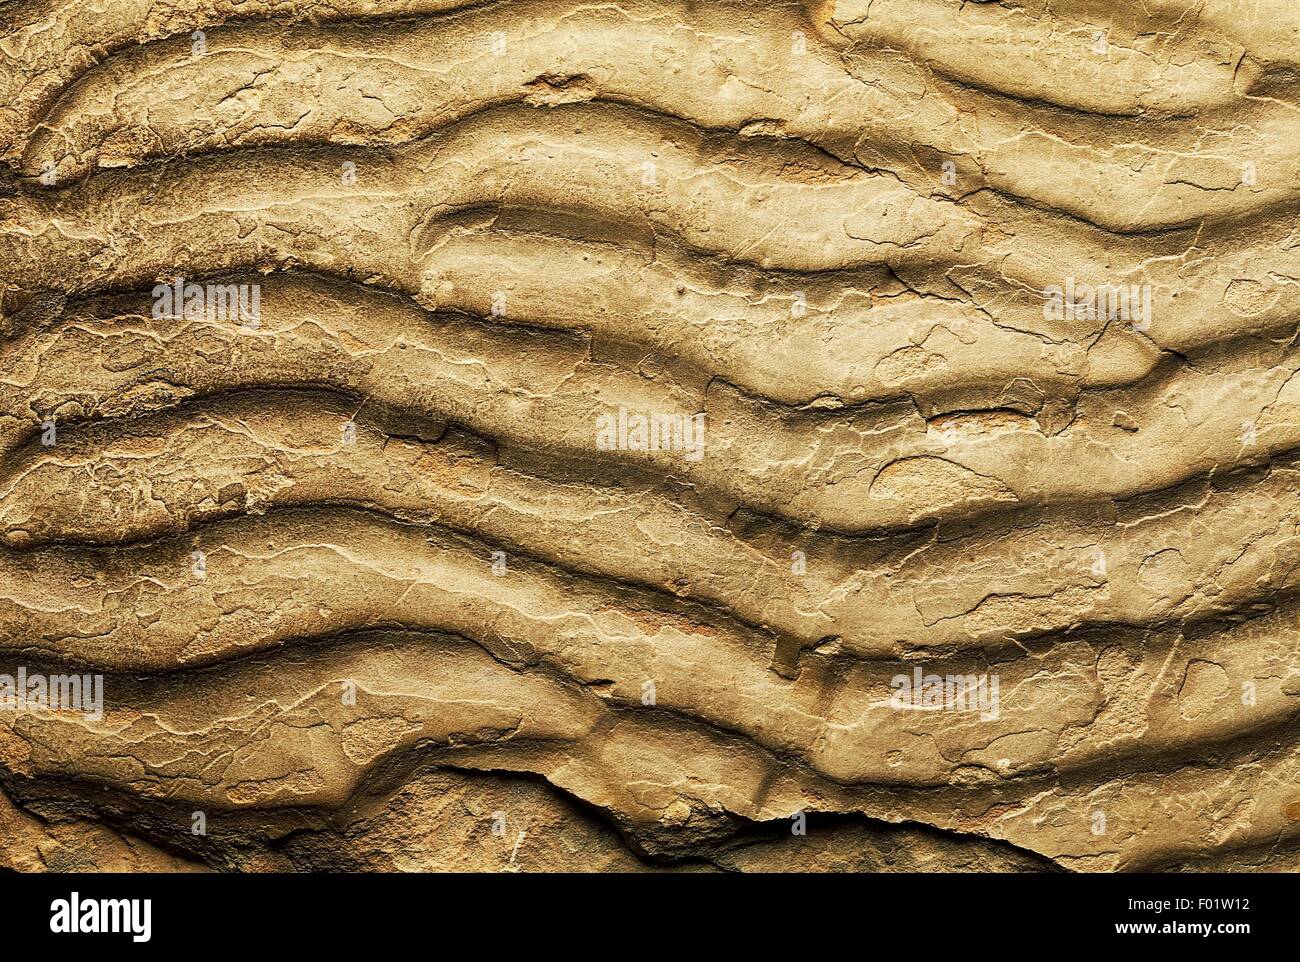 Ripple marks, sedimentary structures formed by water (current or waves) or wind. Stock Photo